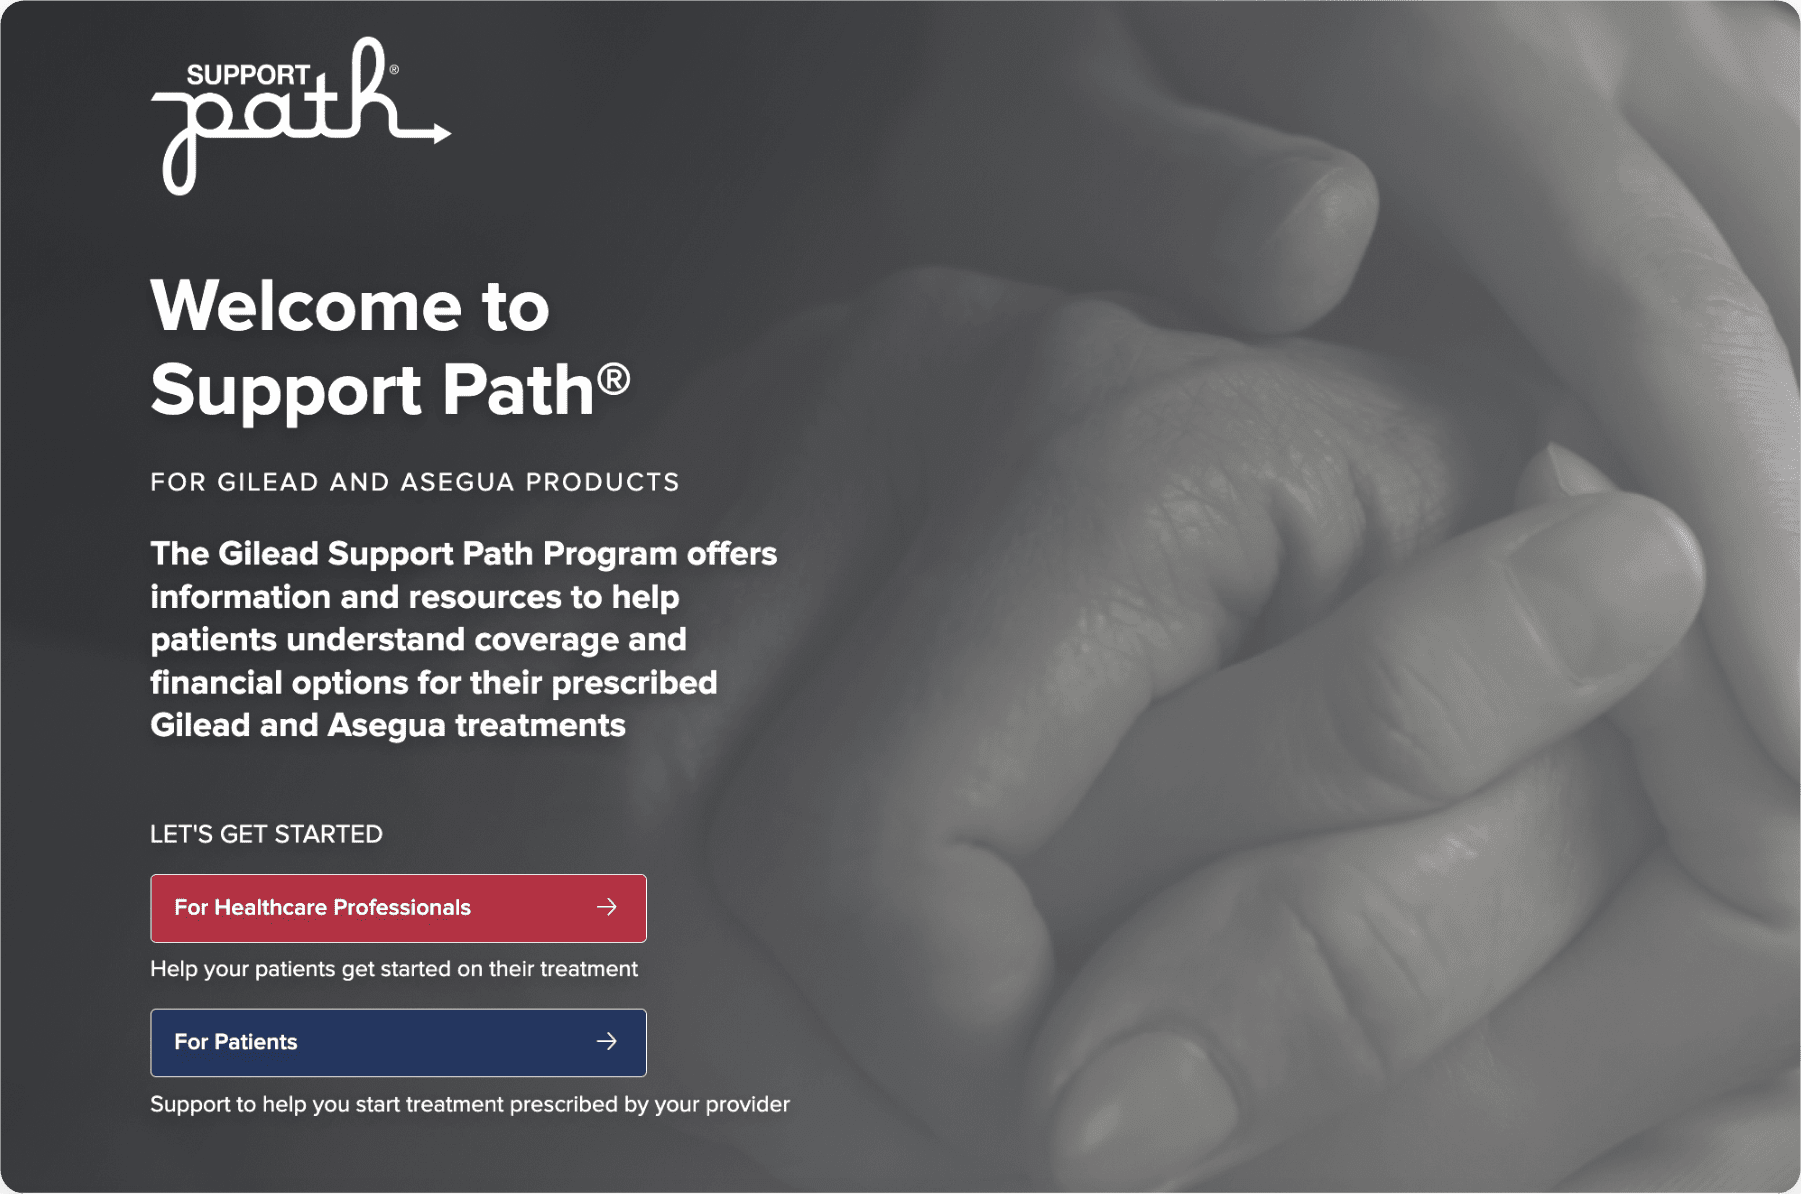 Support Path is a program that can help patients get started on Gilead treatments